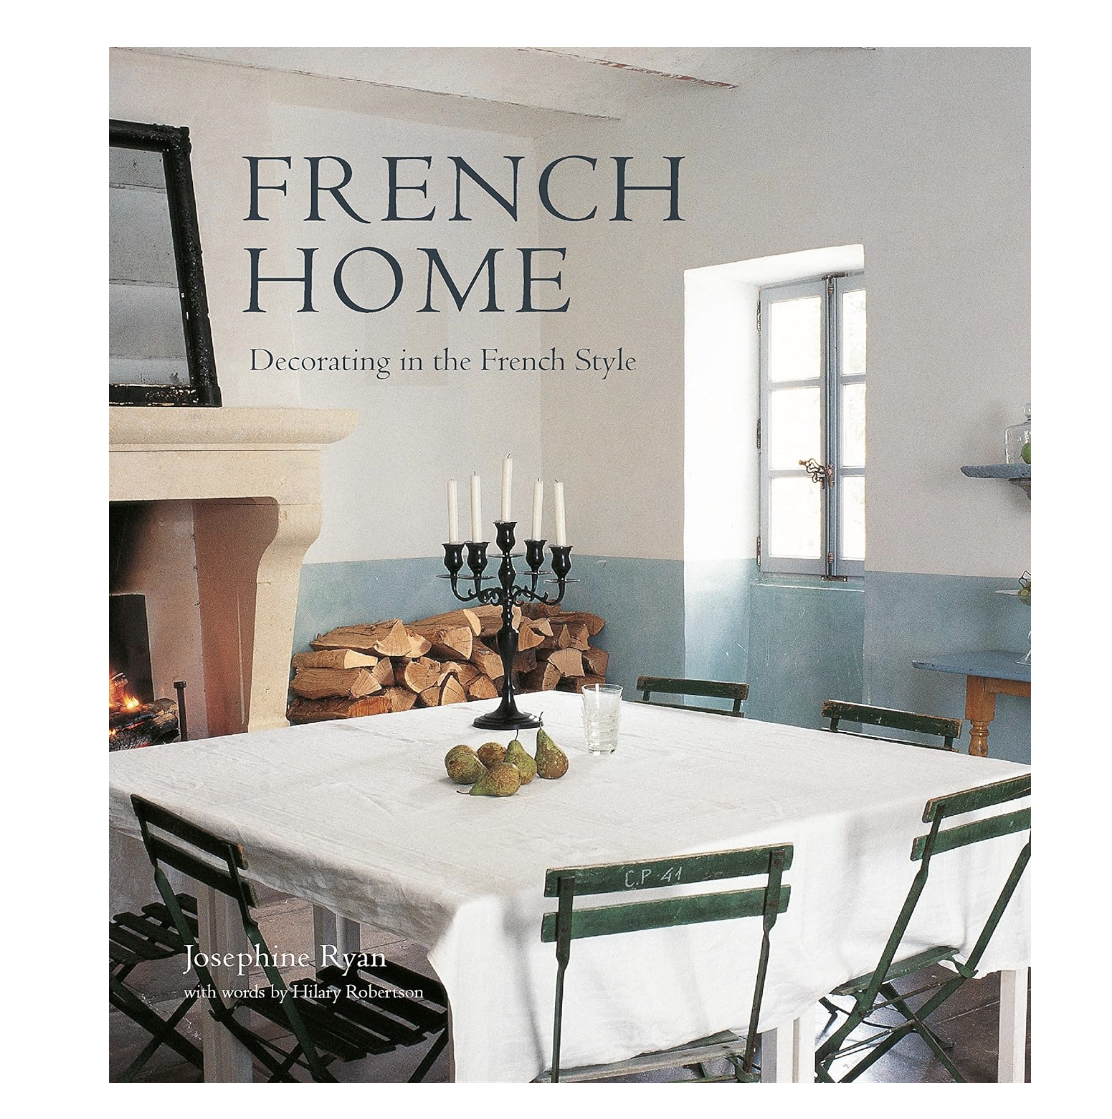 French Home: Decorating in the French style